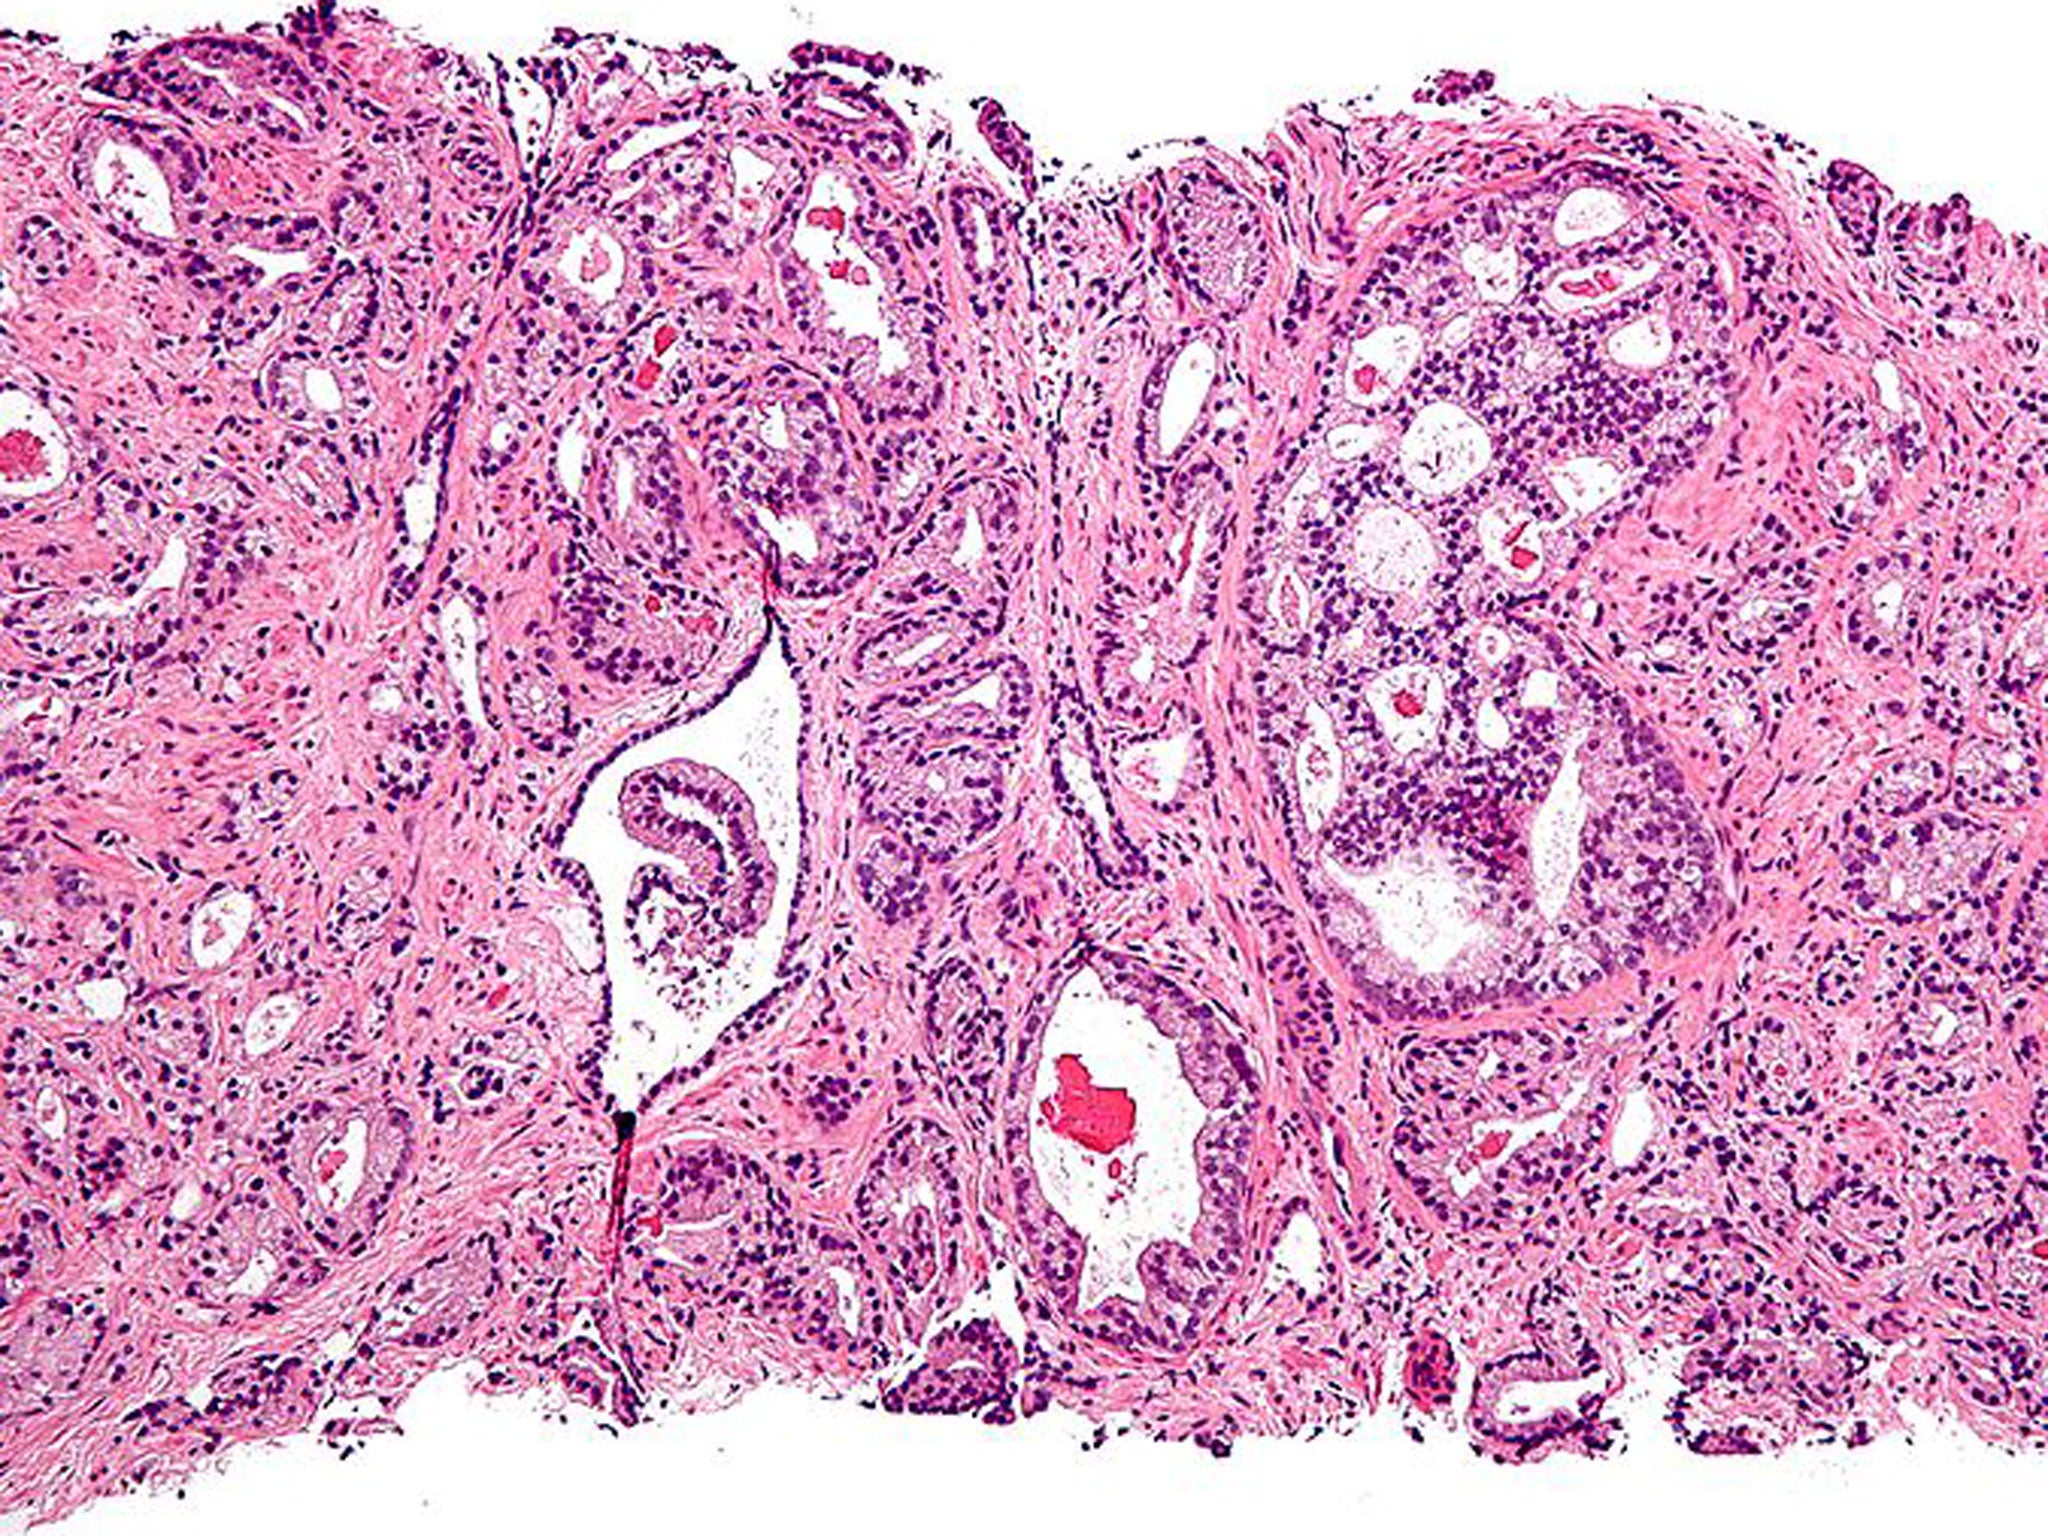 Prostatic acinar adenocarcinoma, the most common form of prostate cancer